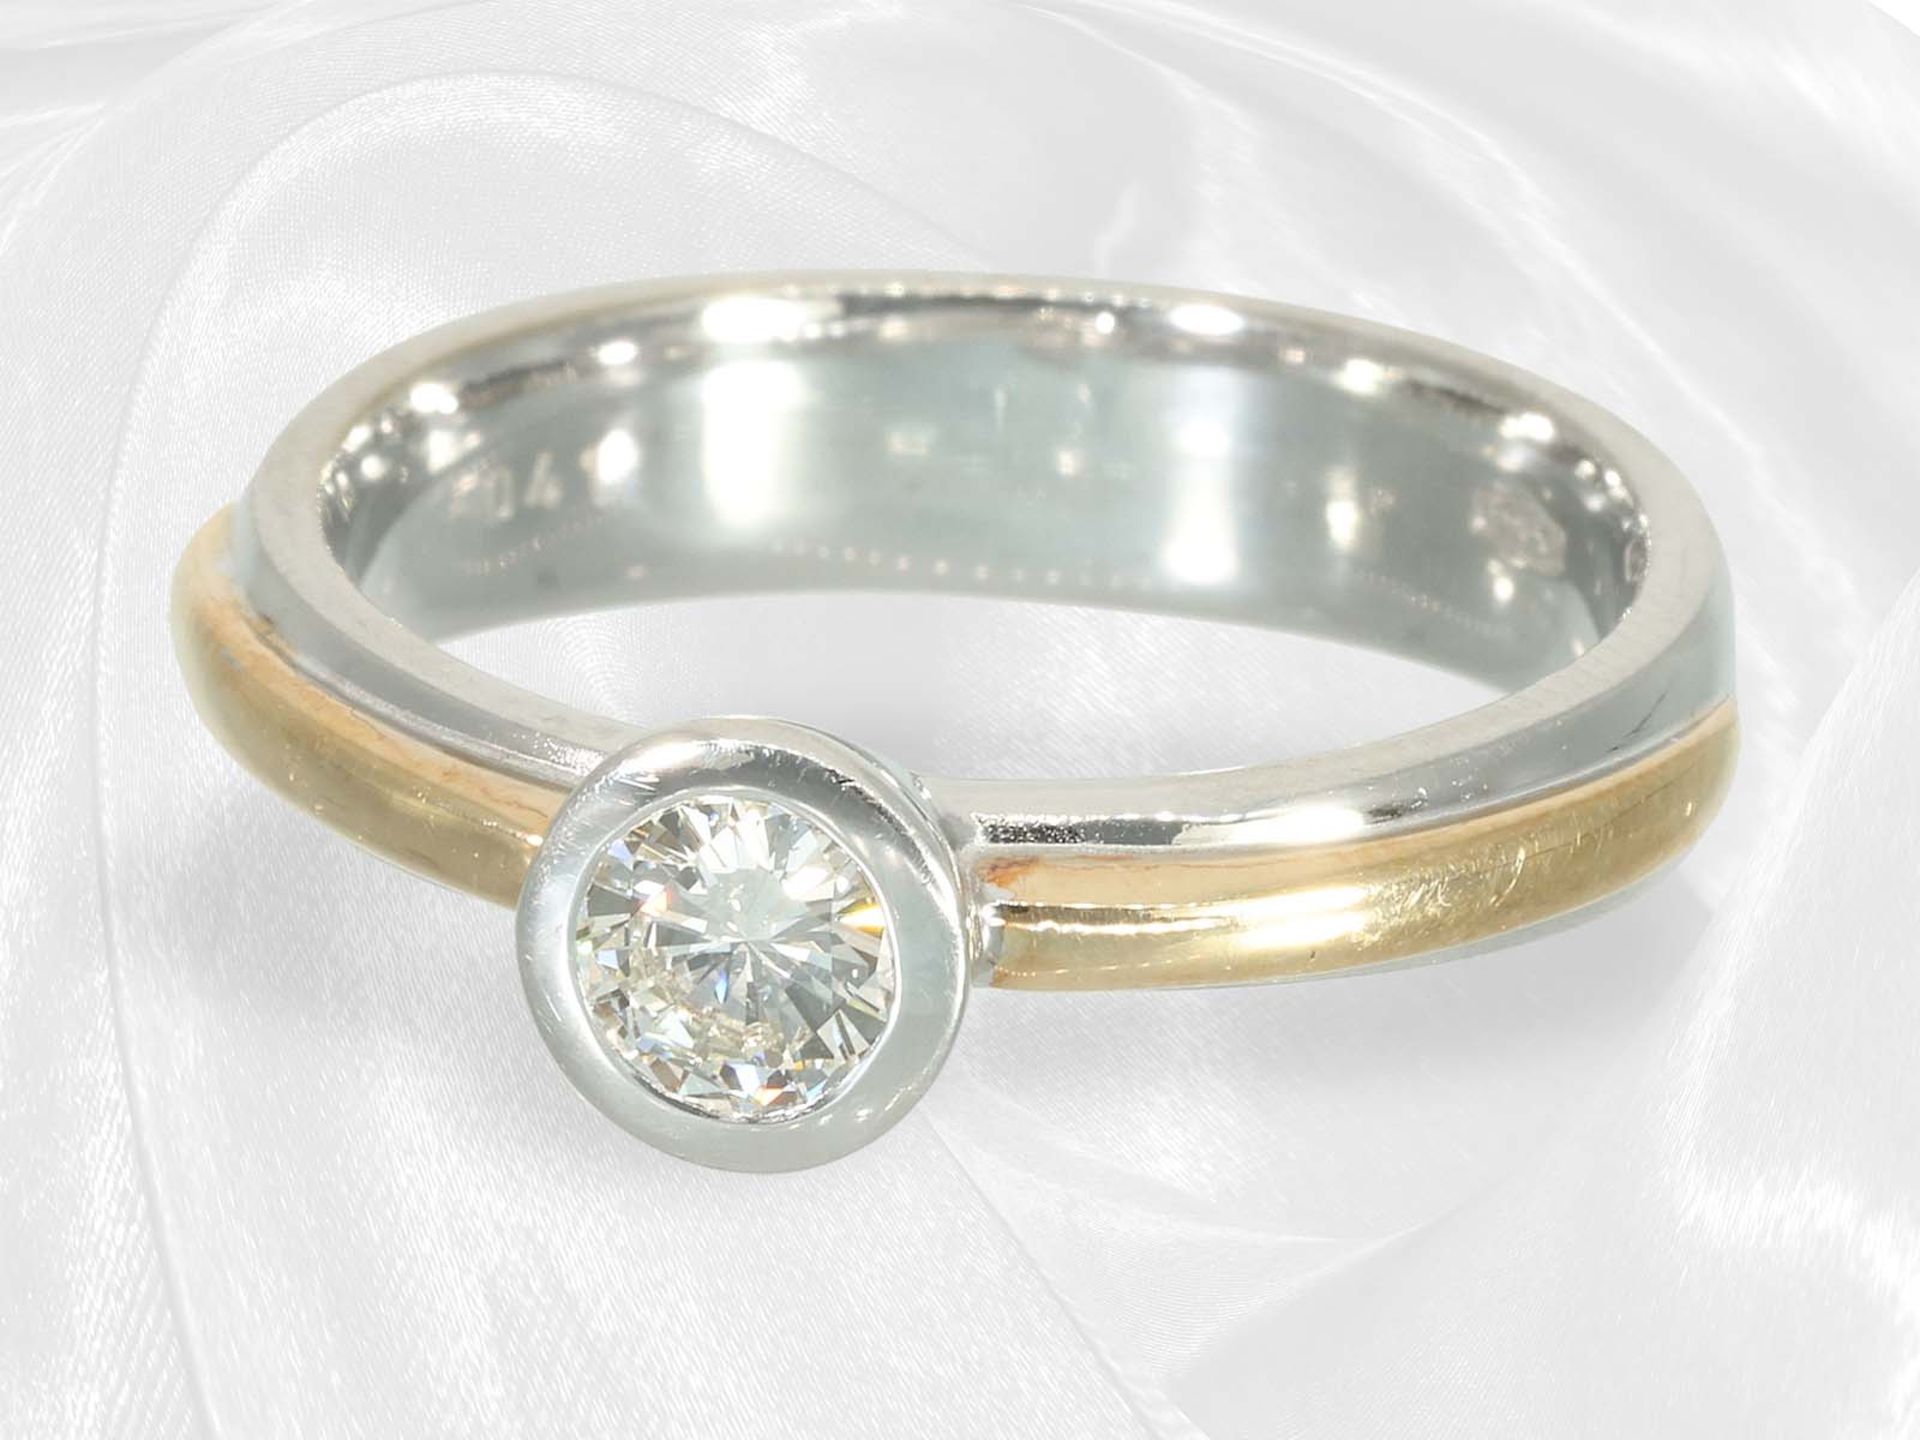 Modern and high quality bicolour goldsmith ring with a brilliant-cut diamond of approx. 0.41ct - Image 3 of 4